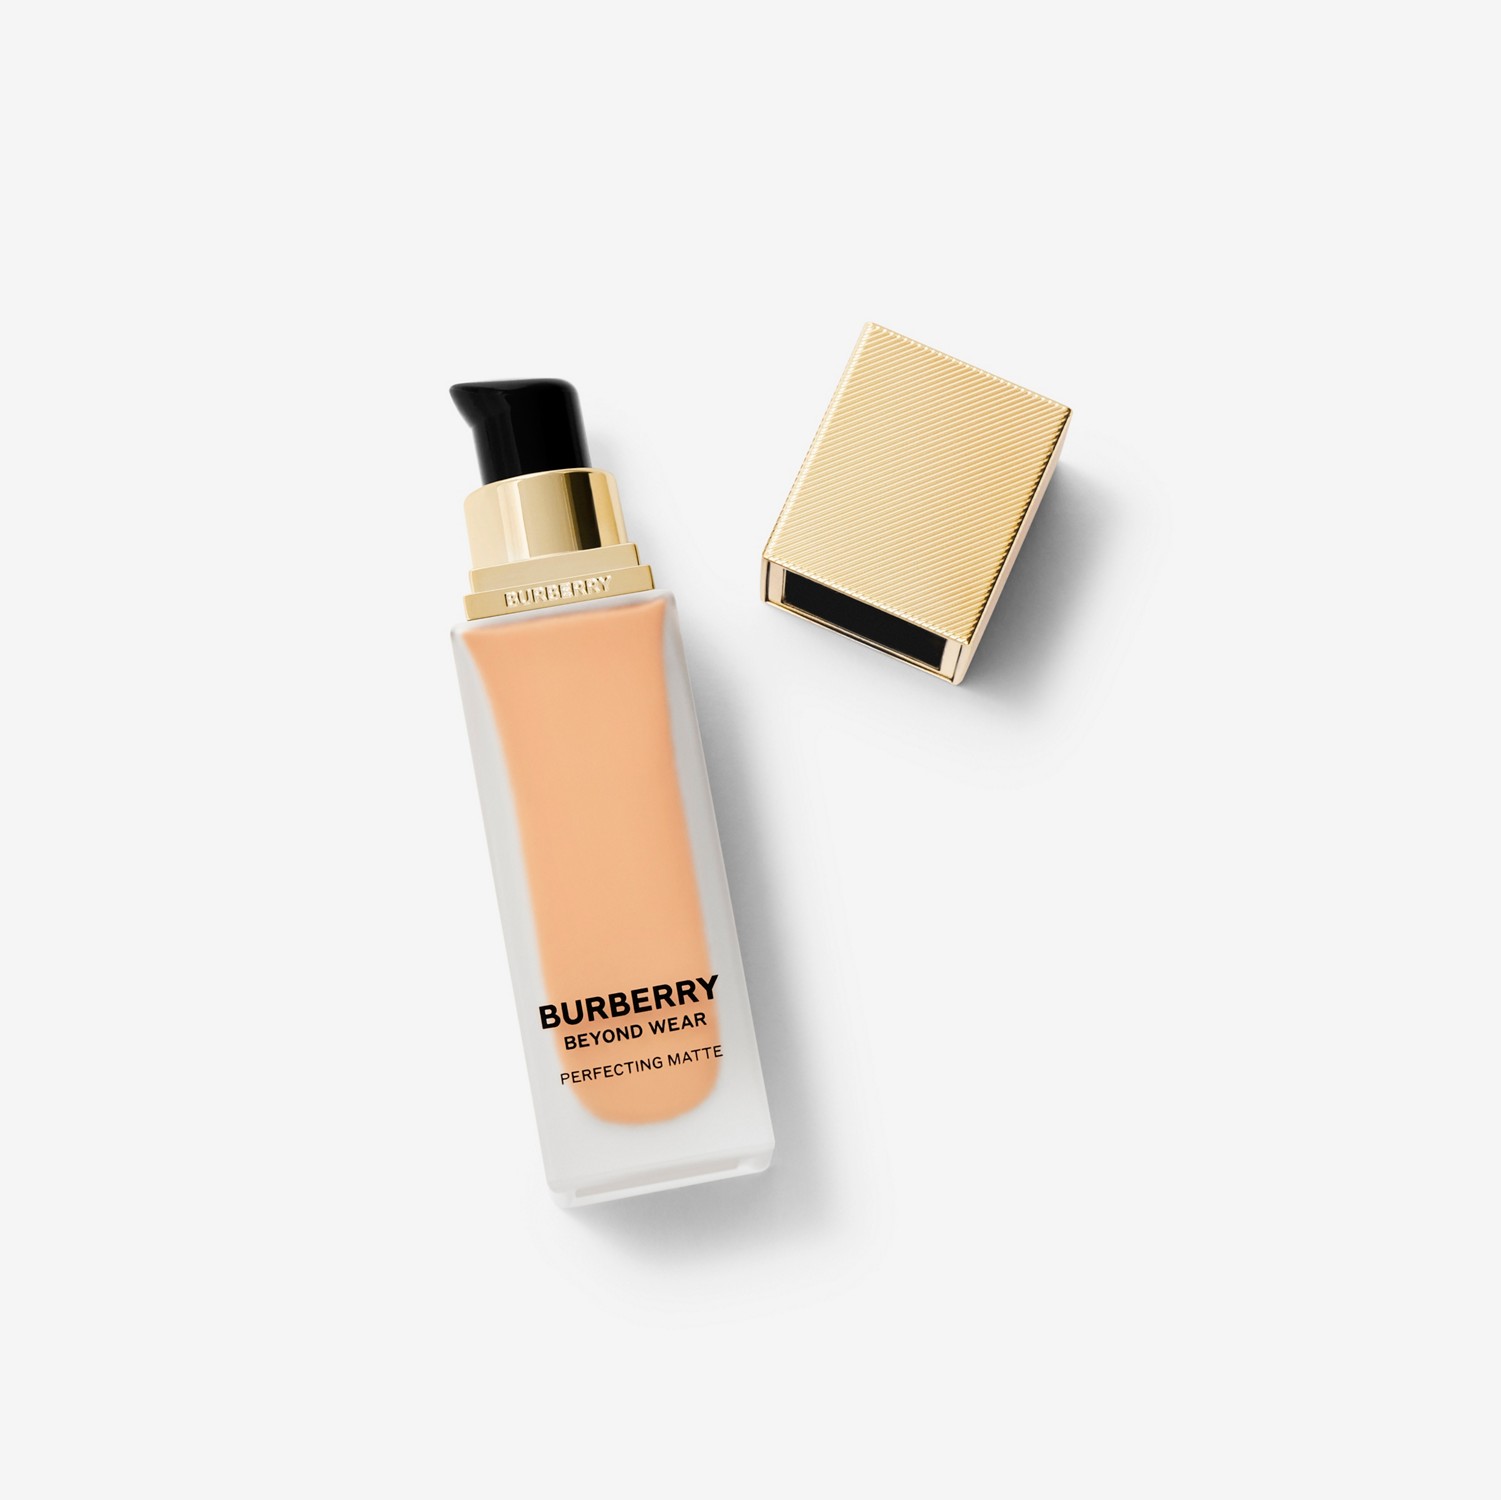 Beyond Wear Perfecting Matte Foundation – 45 Light Warm - Mulheres | Burberry® oficial